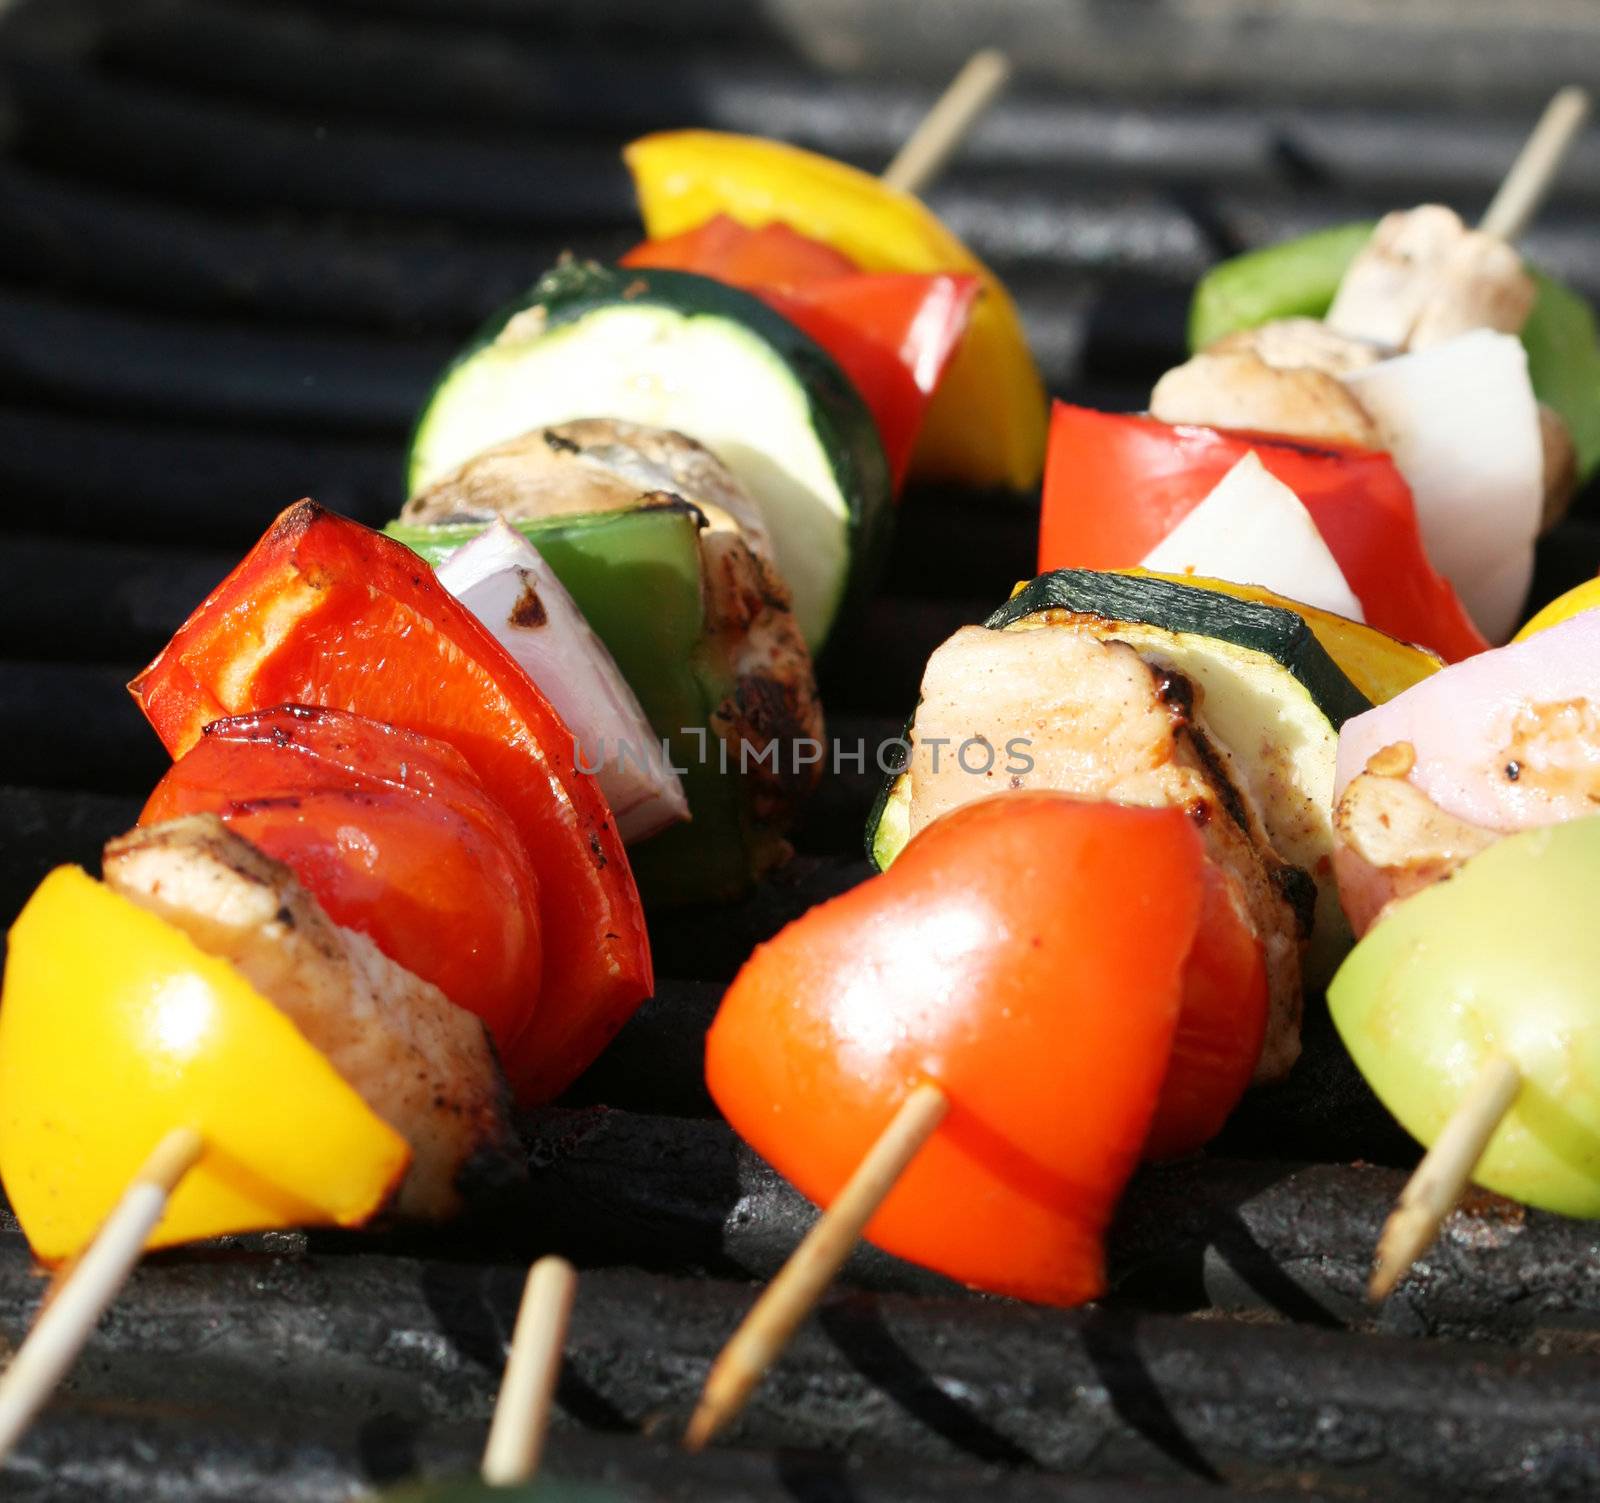 Grilling shishkabobs during a summer picnic at the park